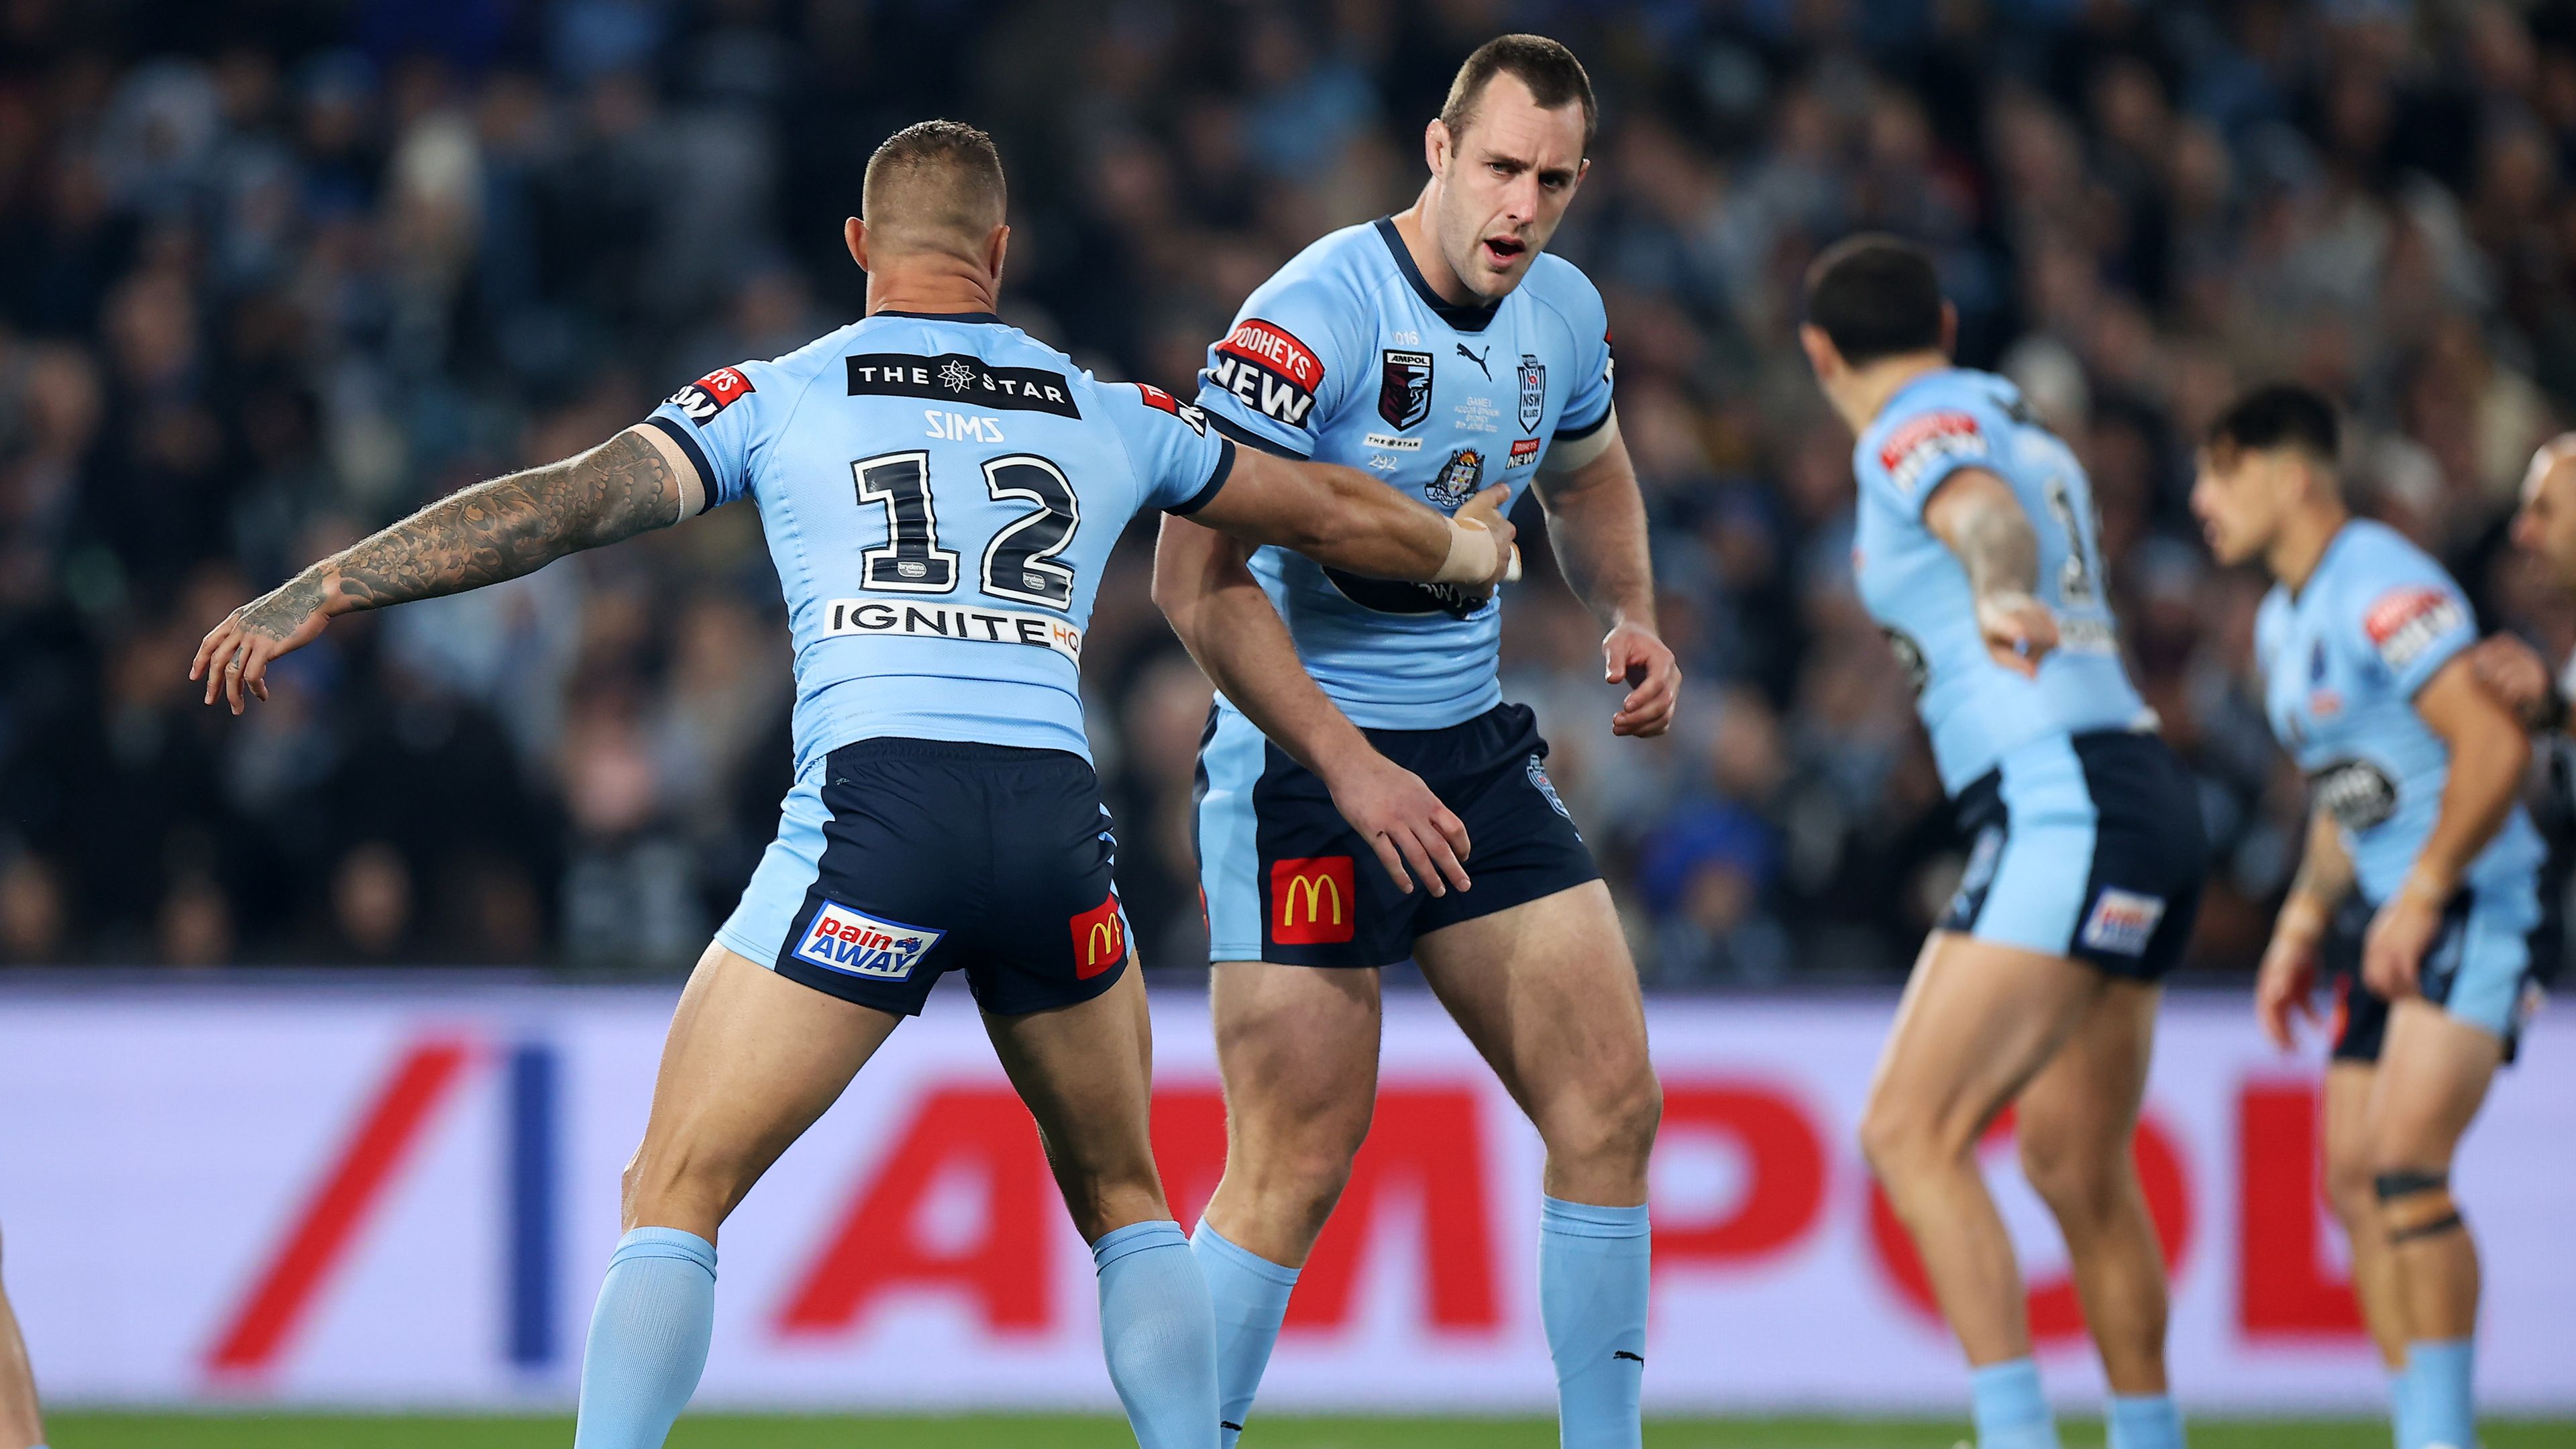 Isaah Yeo was supported by teammate Tariq Sims after stumbling out of the first tackle of Origin game one on Wednesday night. Image: Getty